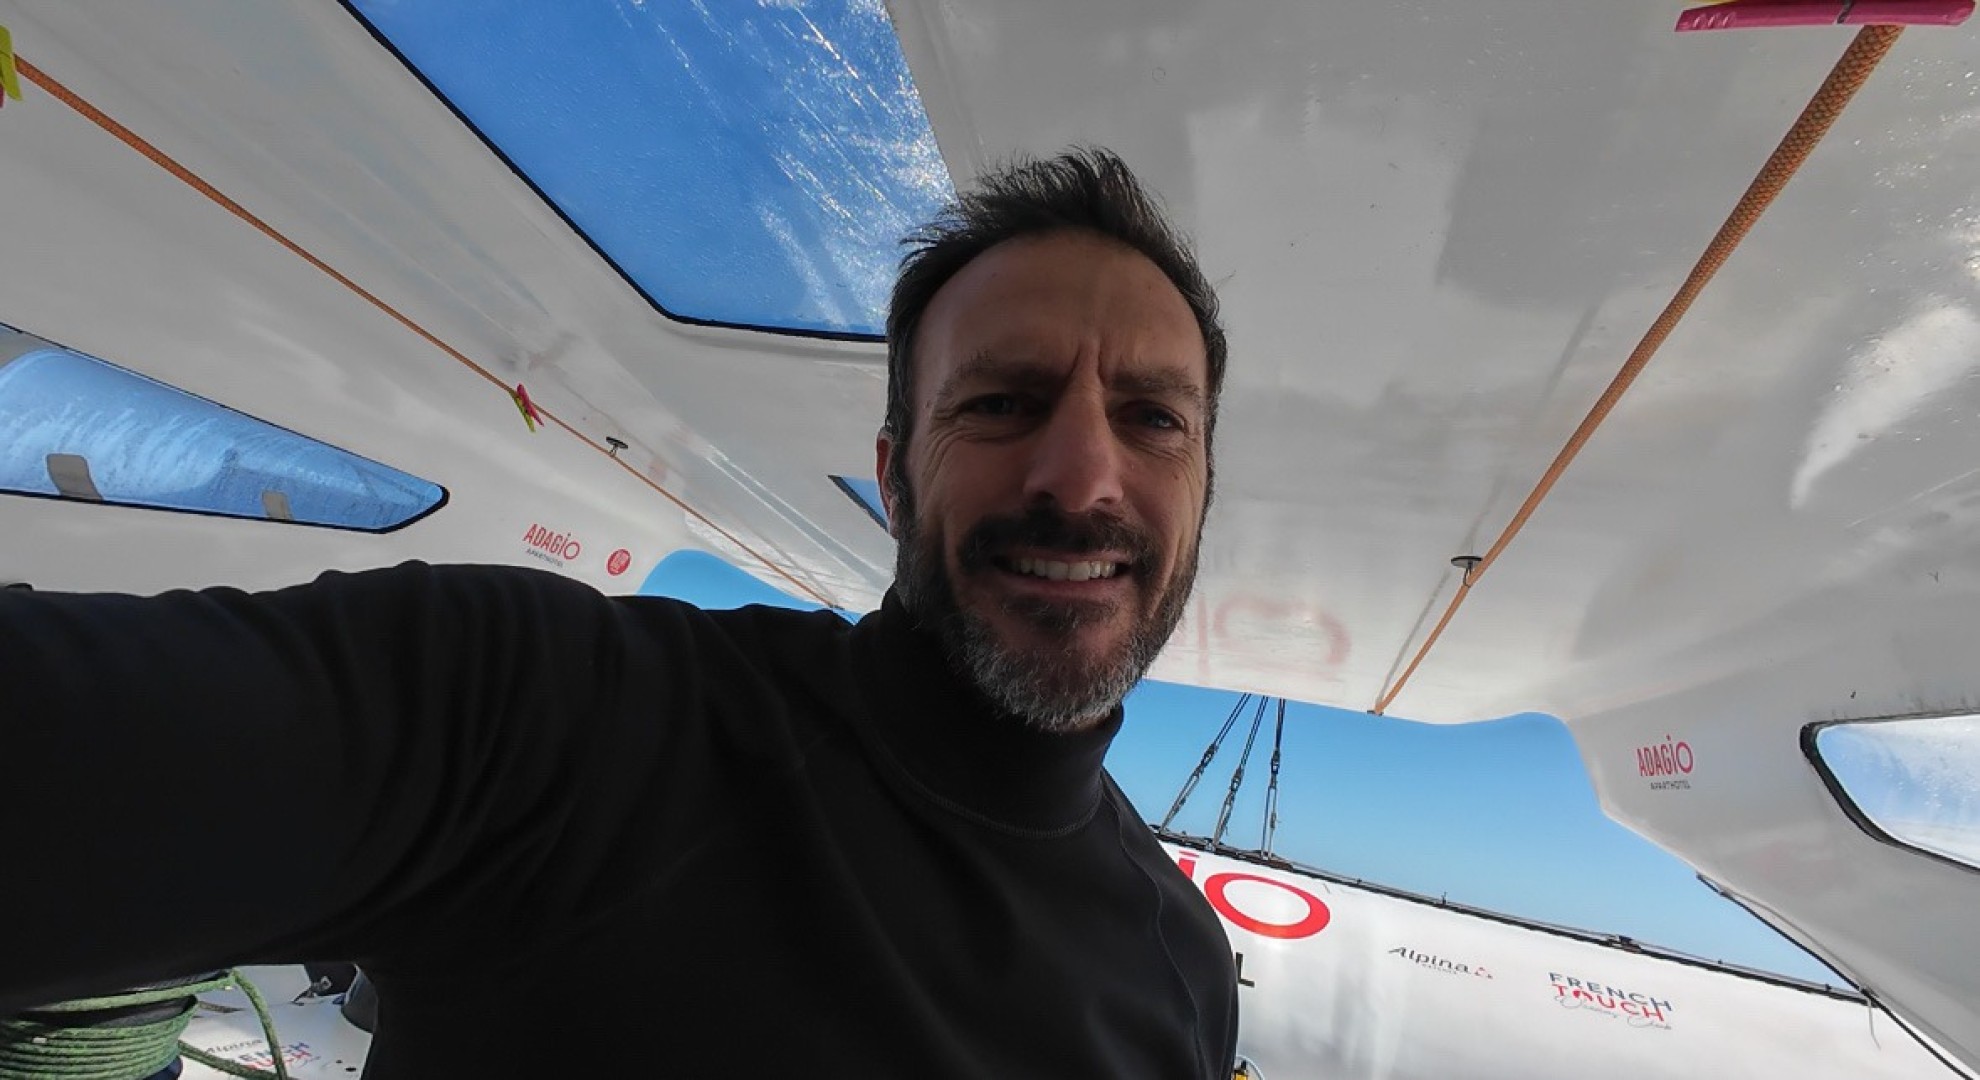 Fifth placed Éric Péron passes Cape Horn and sets a Pacific record for this race